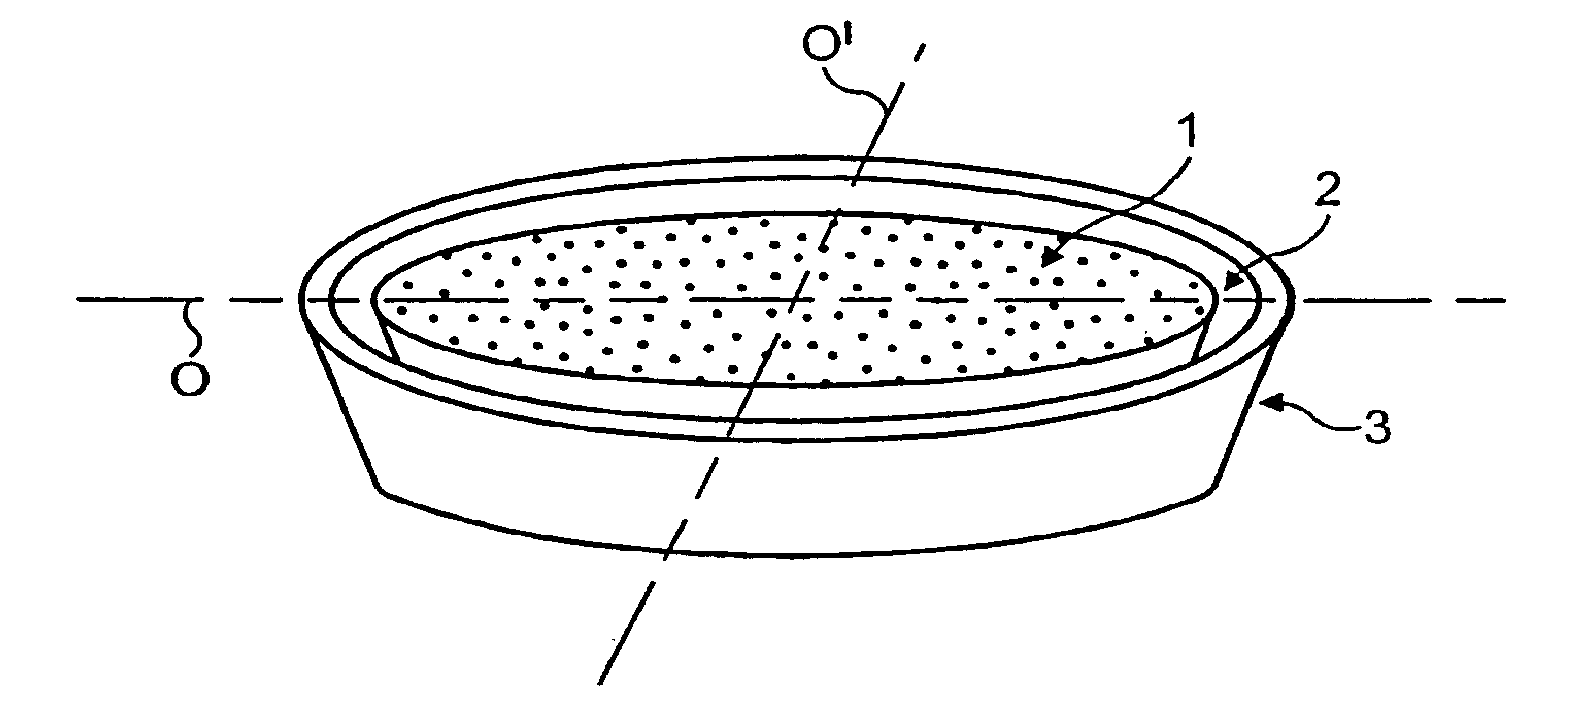 Uniform microwave heating of food in a container